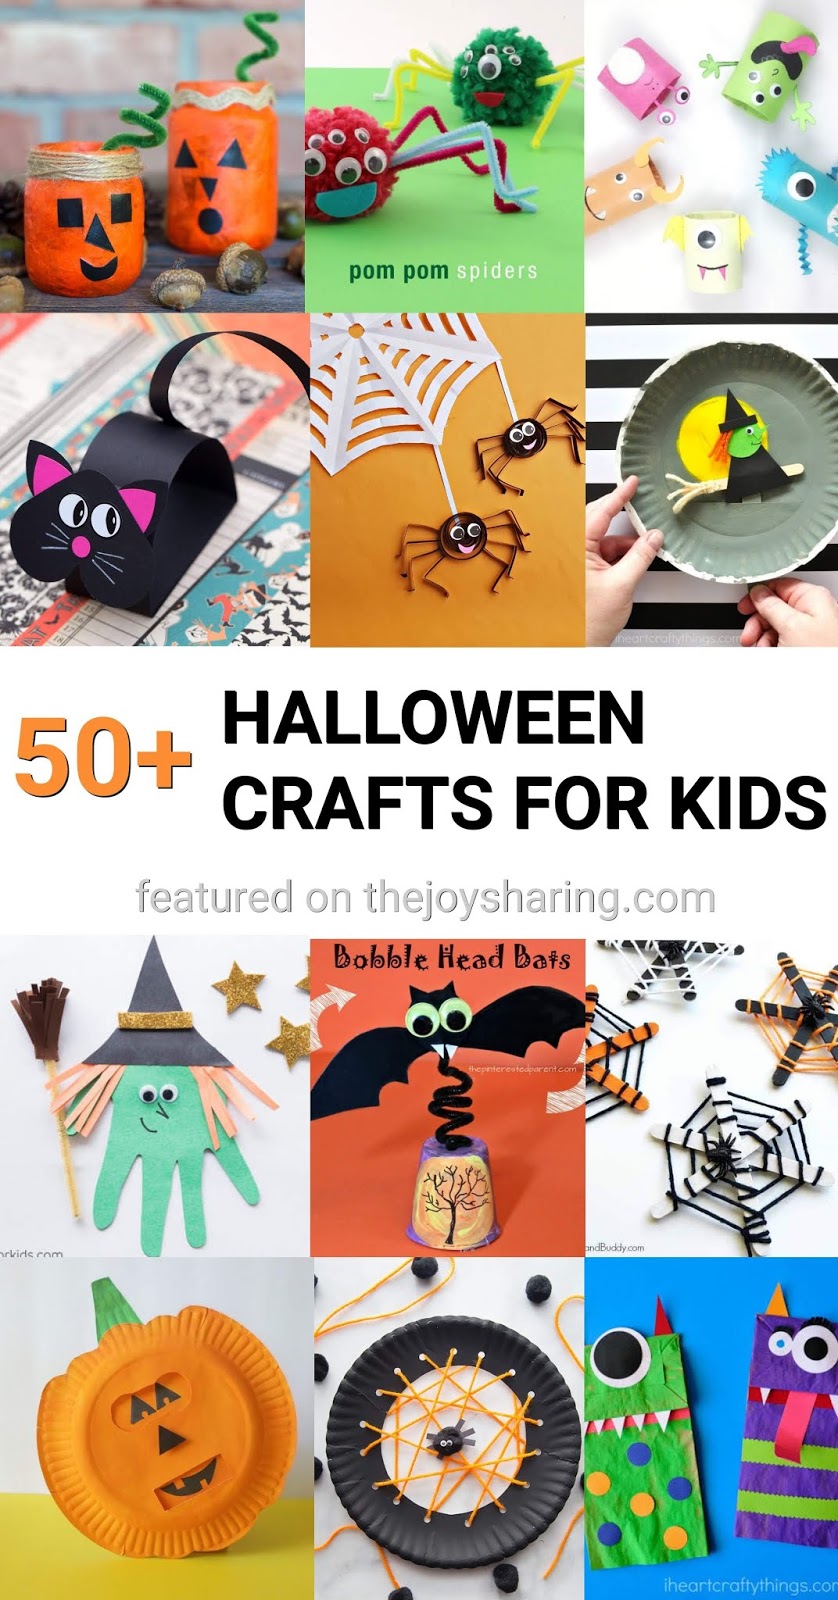 Halloween crafts, Arts and Crafts for Halloween, Halloween crafts for preschoolers, halloween crafts for kindergarten, halloween crafts for toddlers, halloween crafts for tweens, simple and easy halloween craft ideas, halloween crafts tutorial, halloween crafts pinterest, halloween crafts 2018 